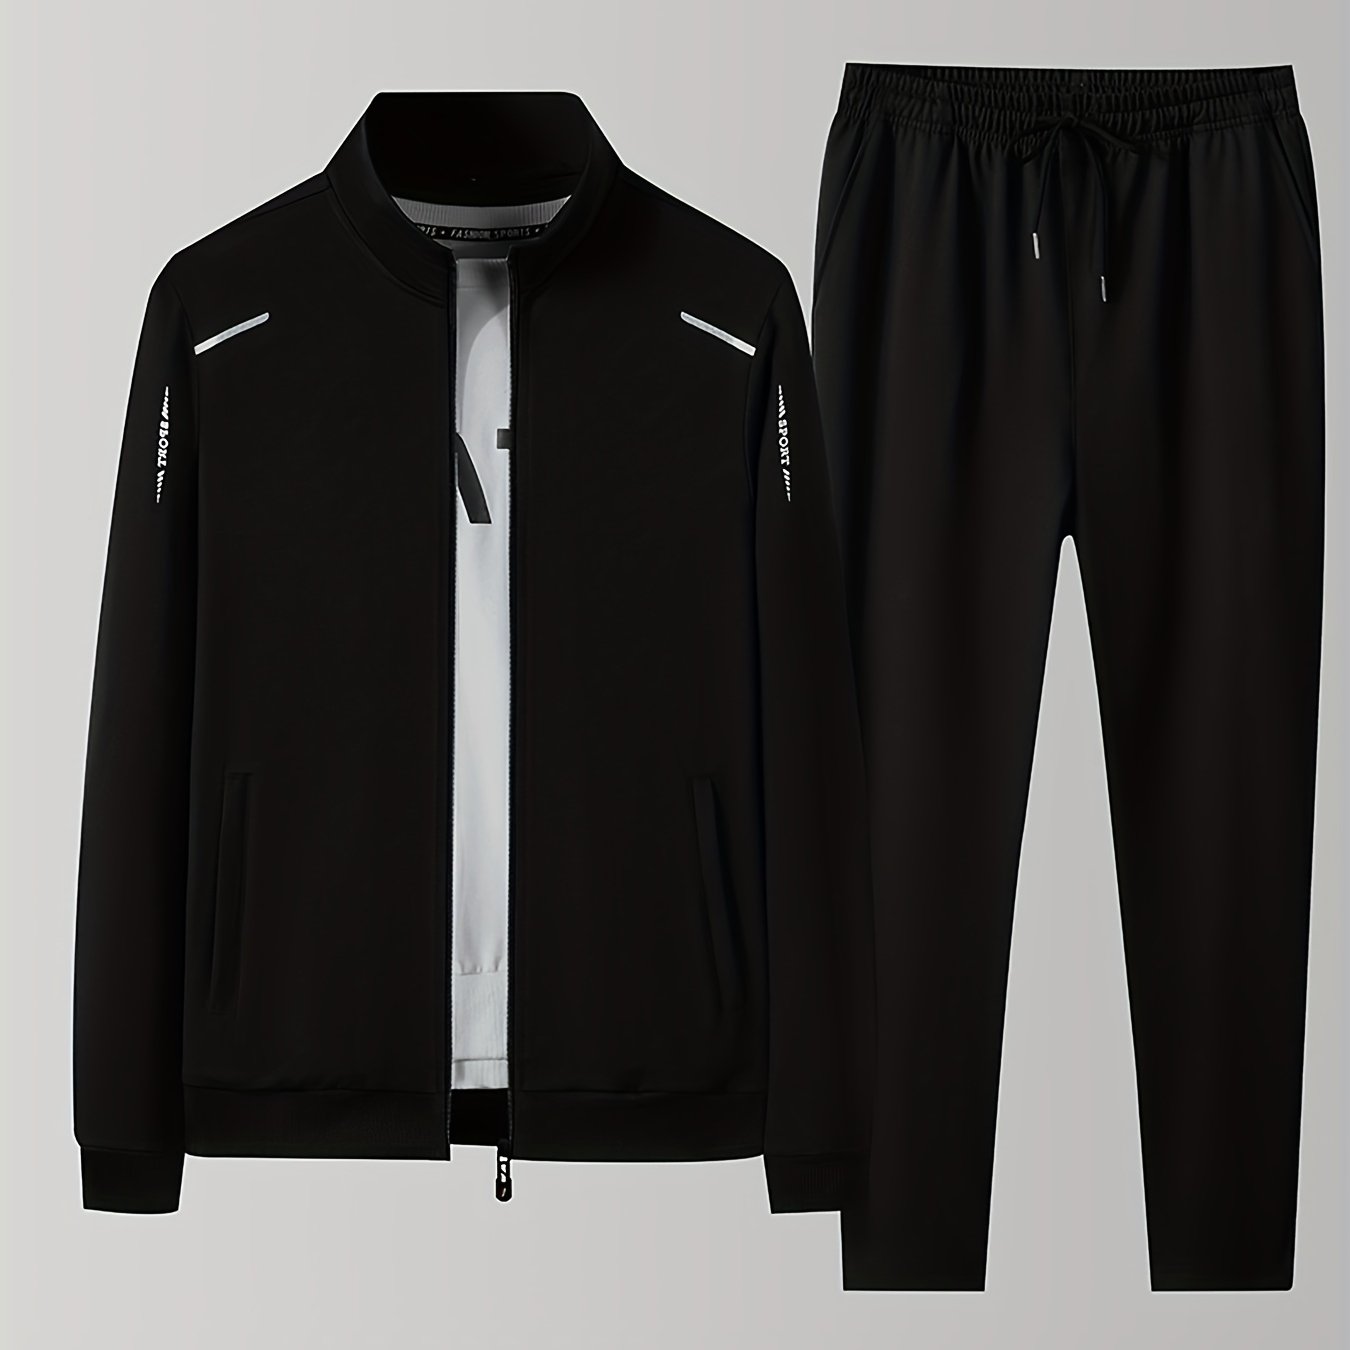 image_1Fleece men's athletic tracksuit in solid color with stretch fabric and pockets, ideal for sports and casual wear